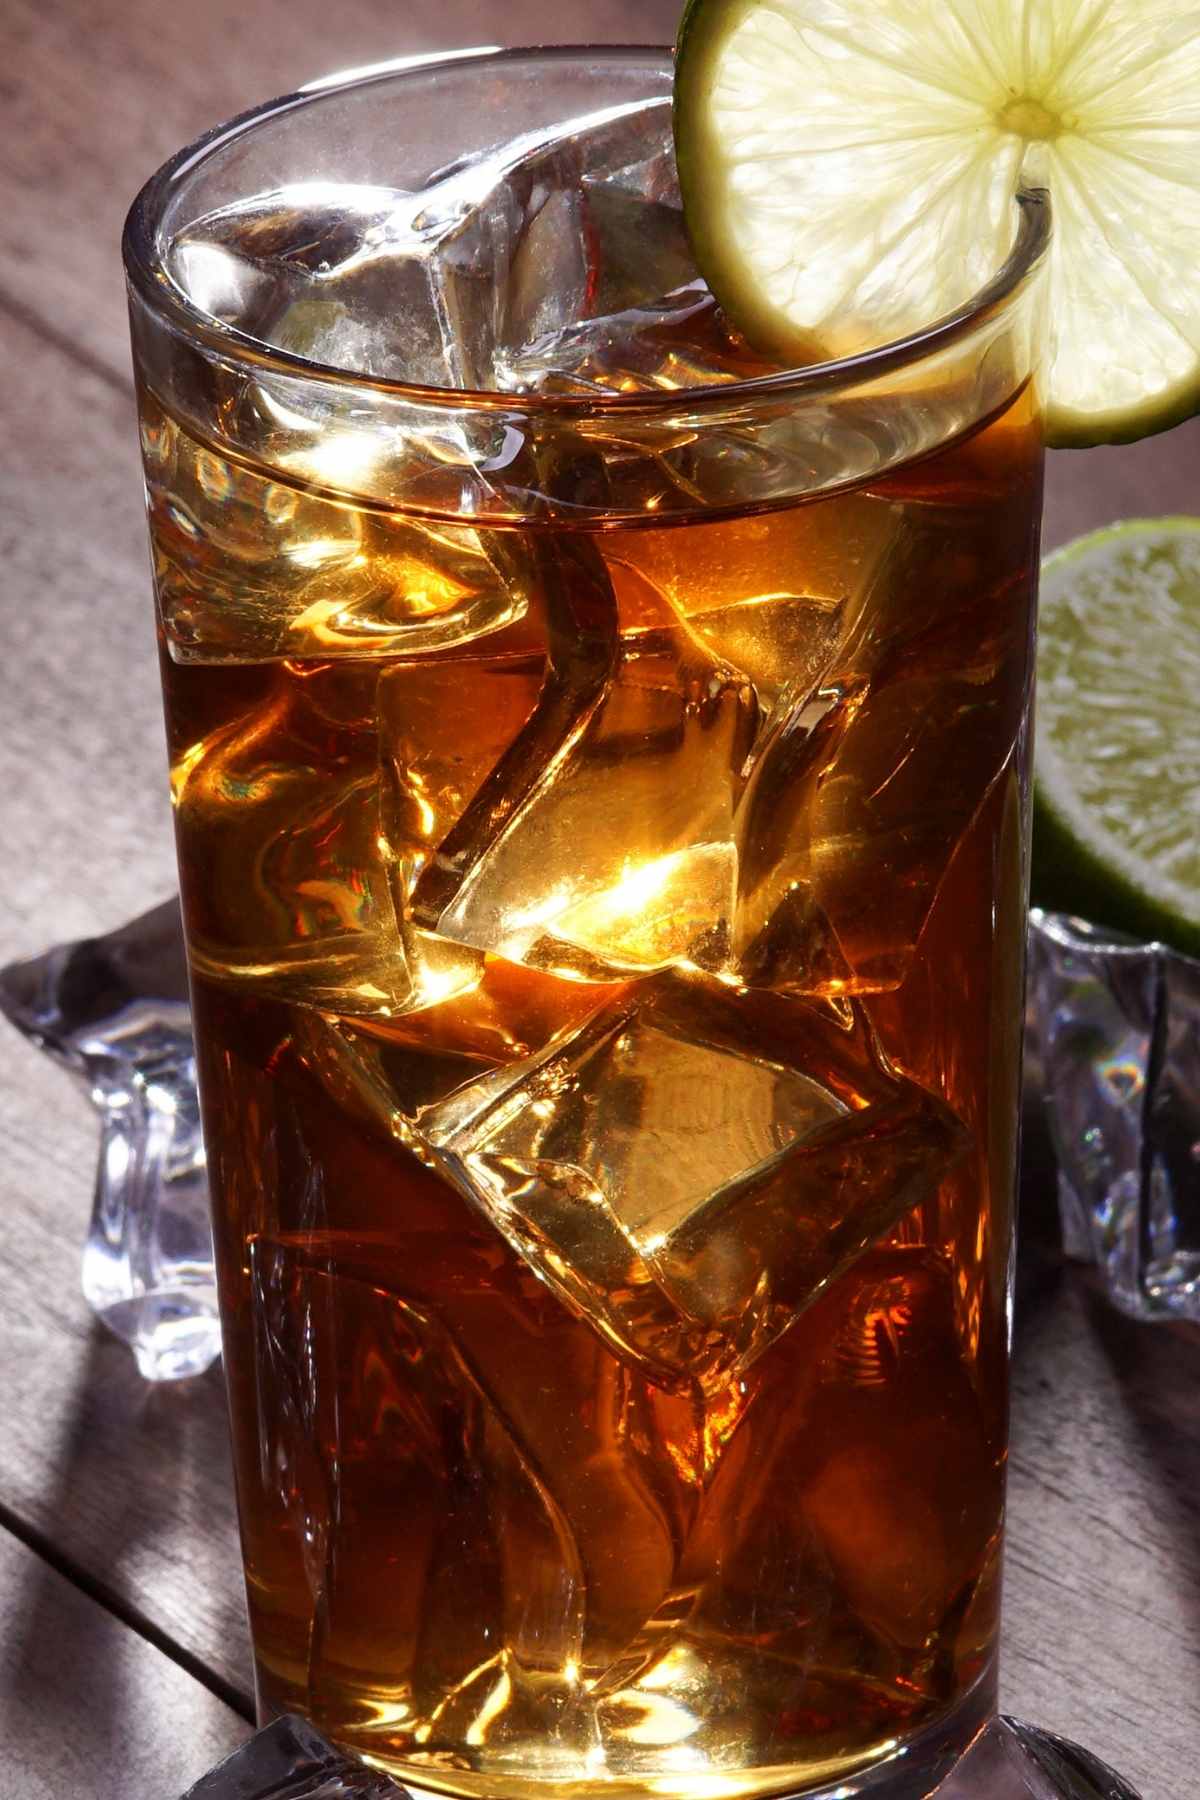 If Long Island iced tea is your favorite party cocktail, you know that it doesn’t actually contain tea. Instead, this popular drink is a delicious combination of five kinds of alcohol, lemon juice, simple syrup, and cola!